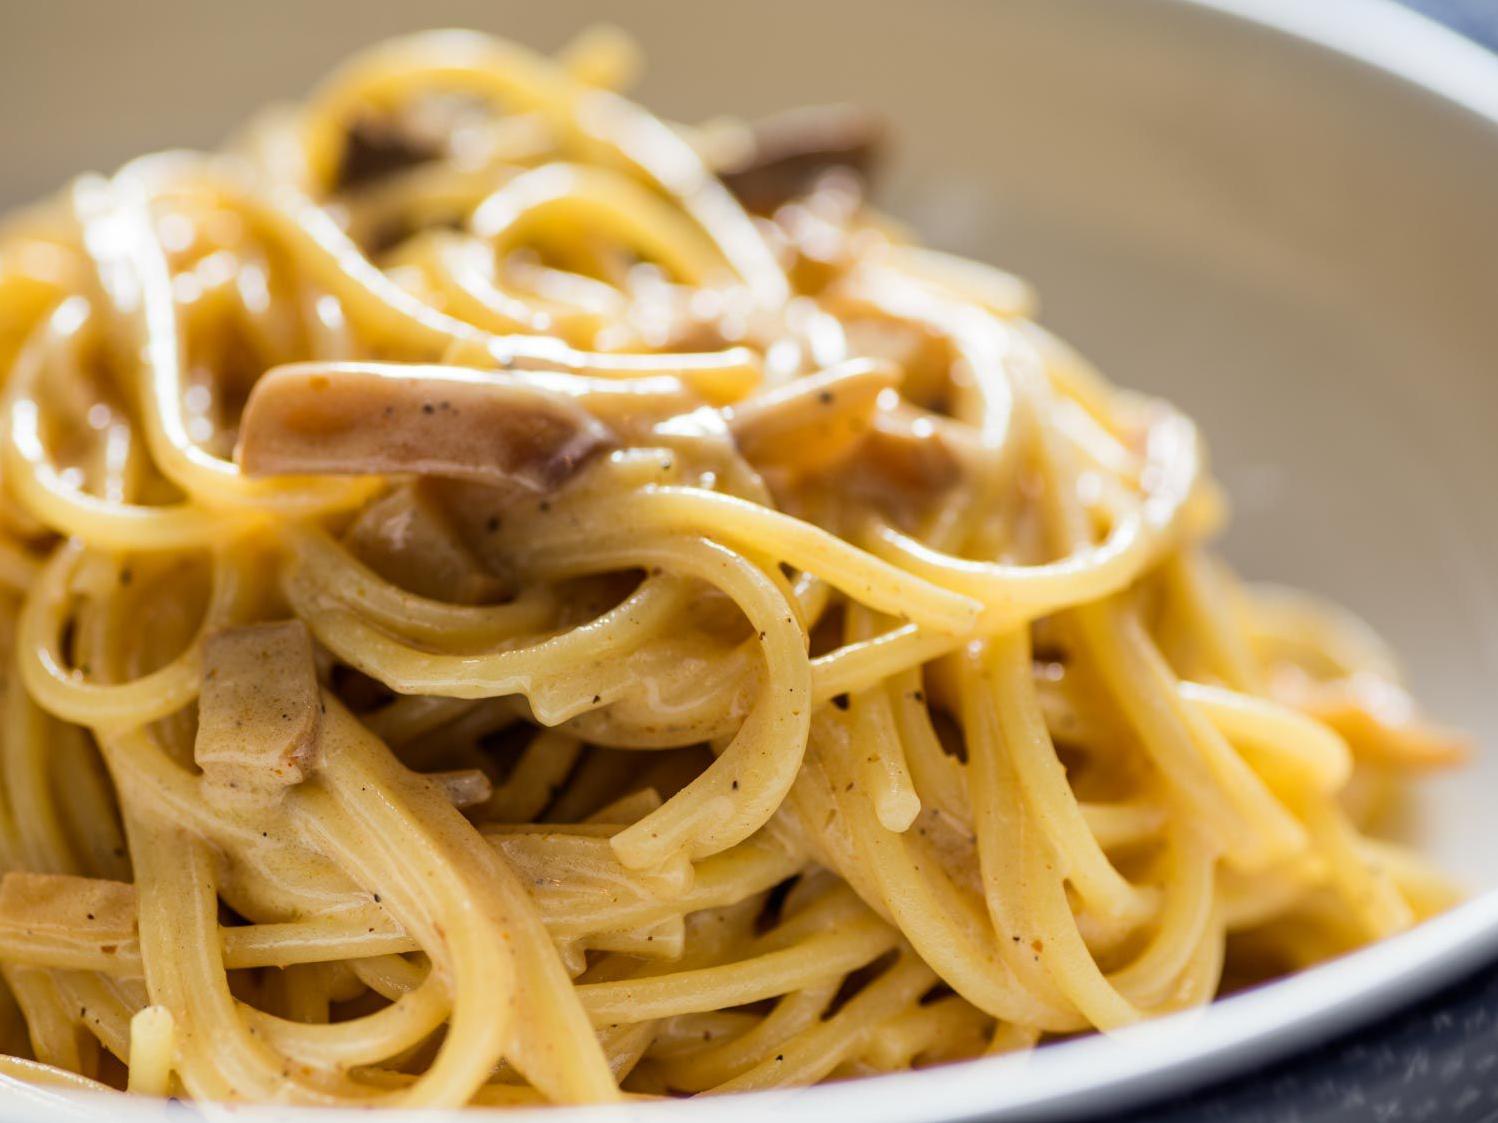  Serve up a plate of this pasta and impress your dinner guests with its decadence.